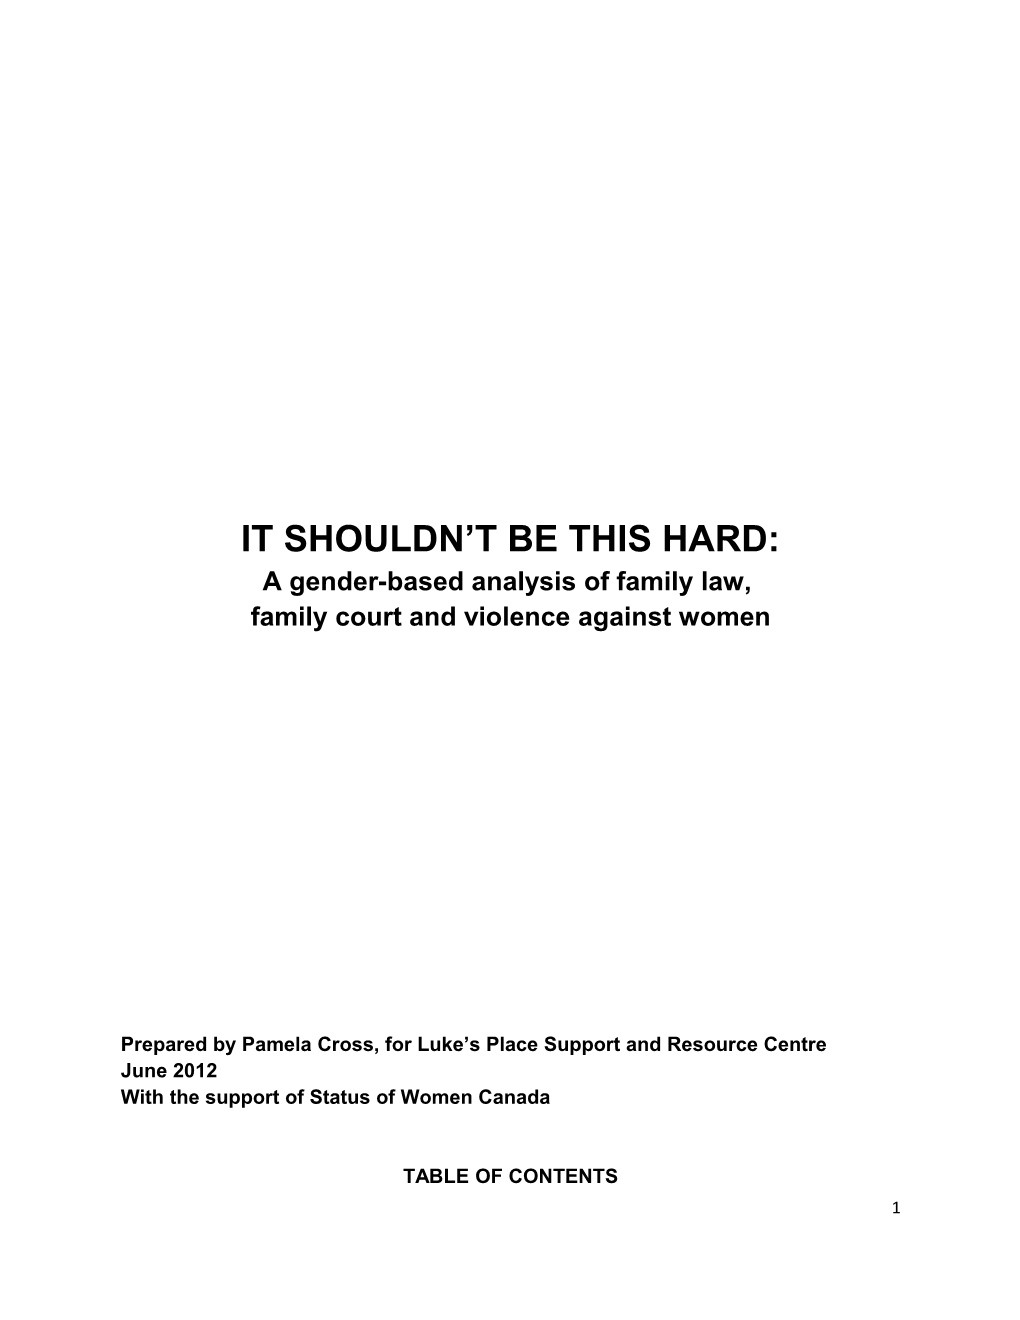 A Gender-Based Analysis of Family Law